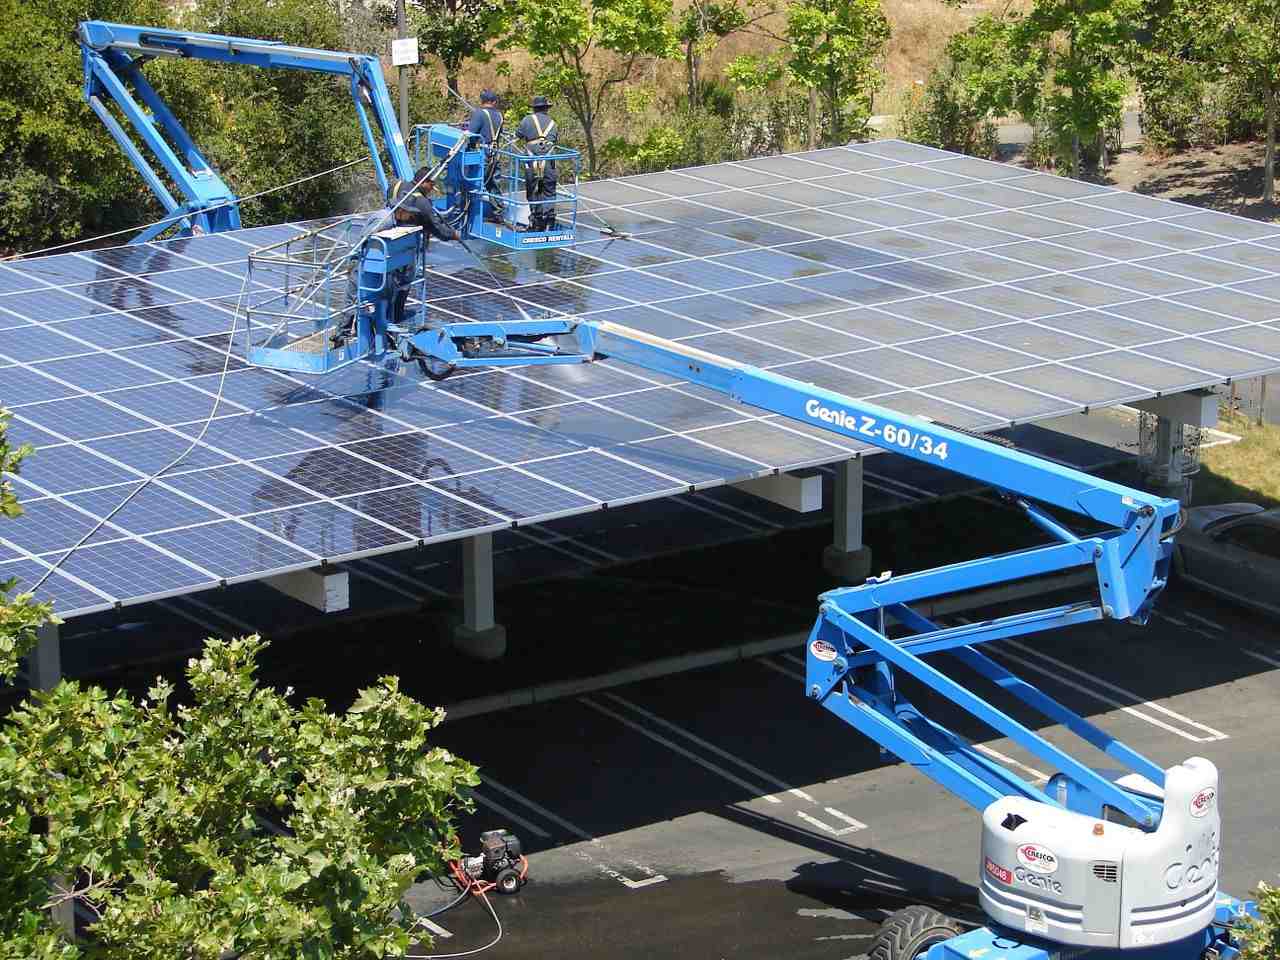 Do solar panels give off radiation?